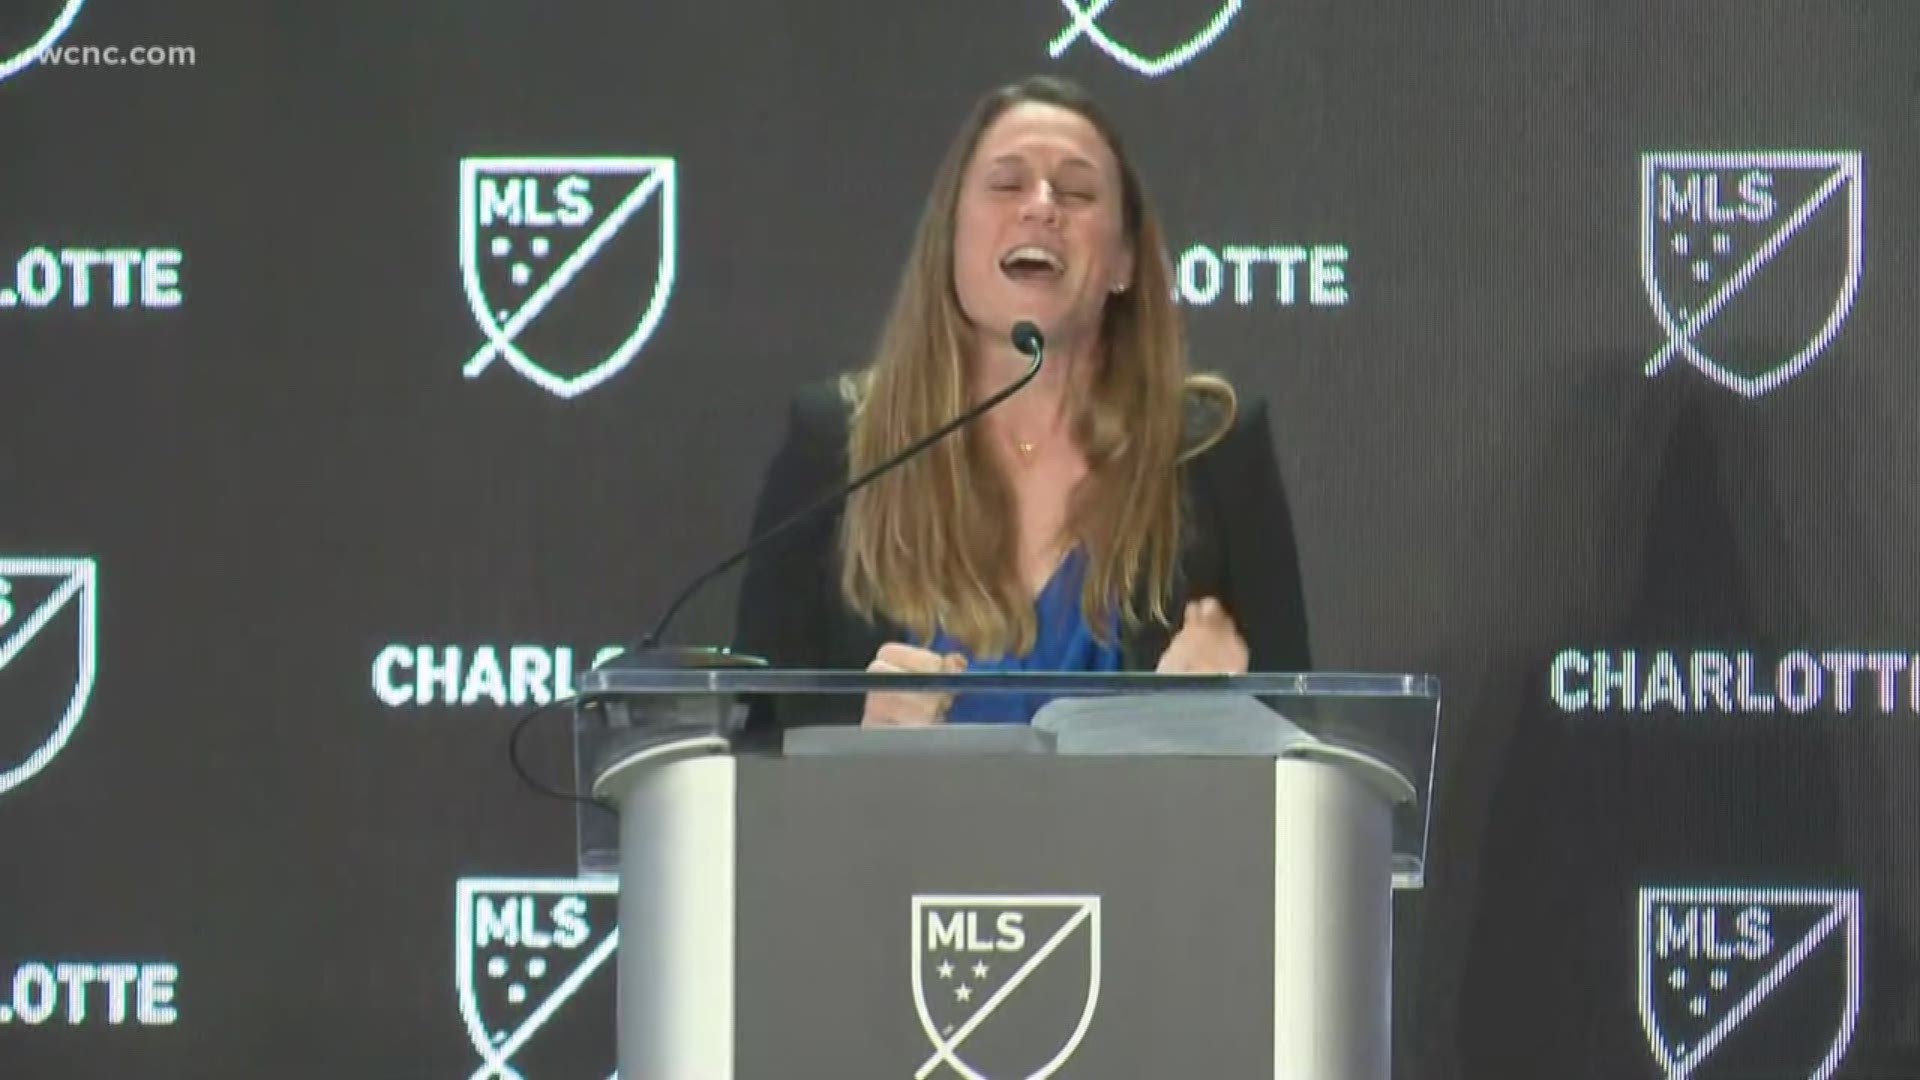 Professional soccer player Heather O'Reilly welcomed Charlotte to Major League Soccer with her rendition of James Taylor's "Carolina In My Mind."